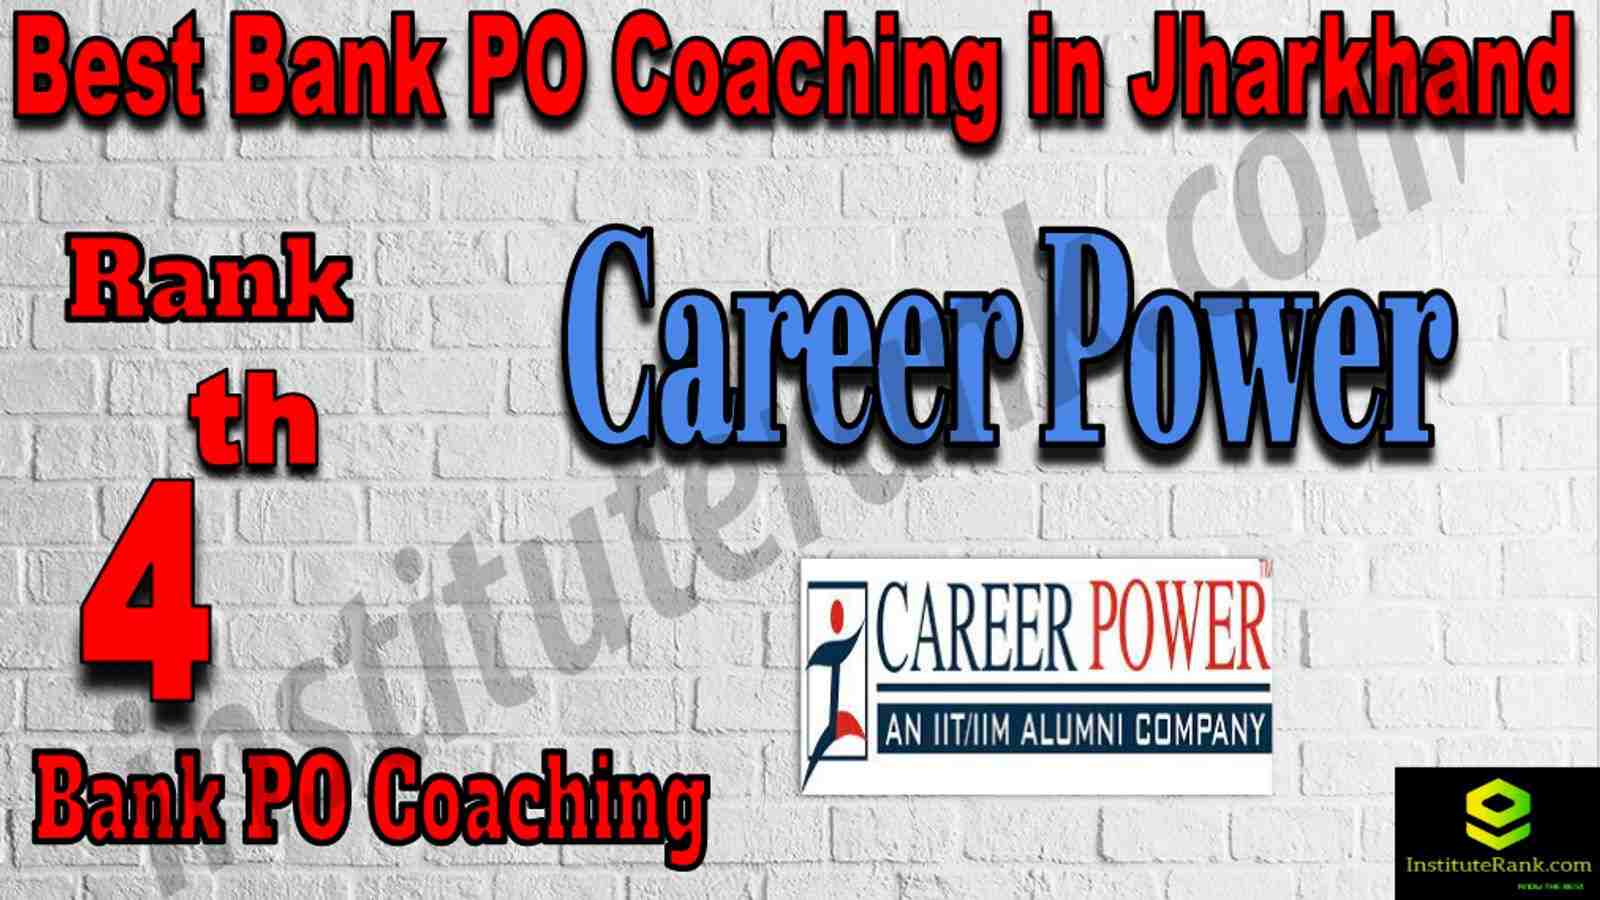 4th Best Bank PO Coaching in Jharkhand